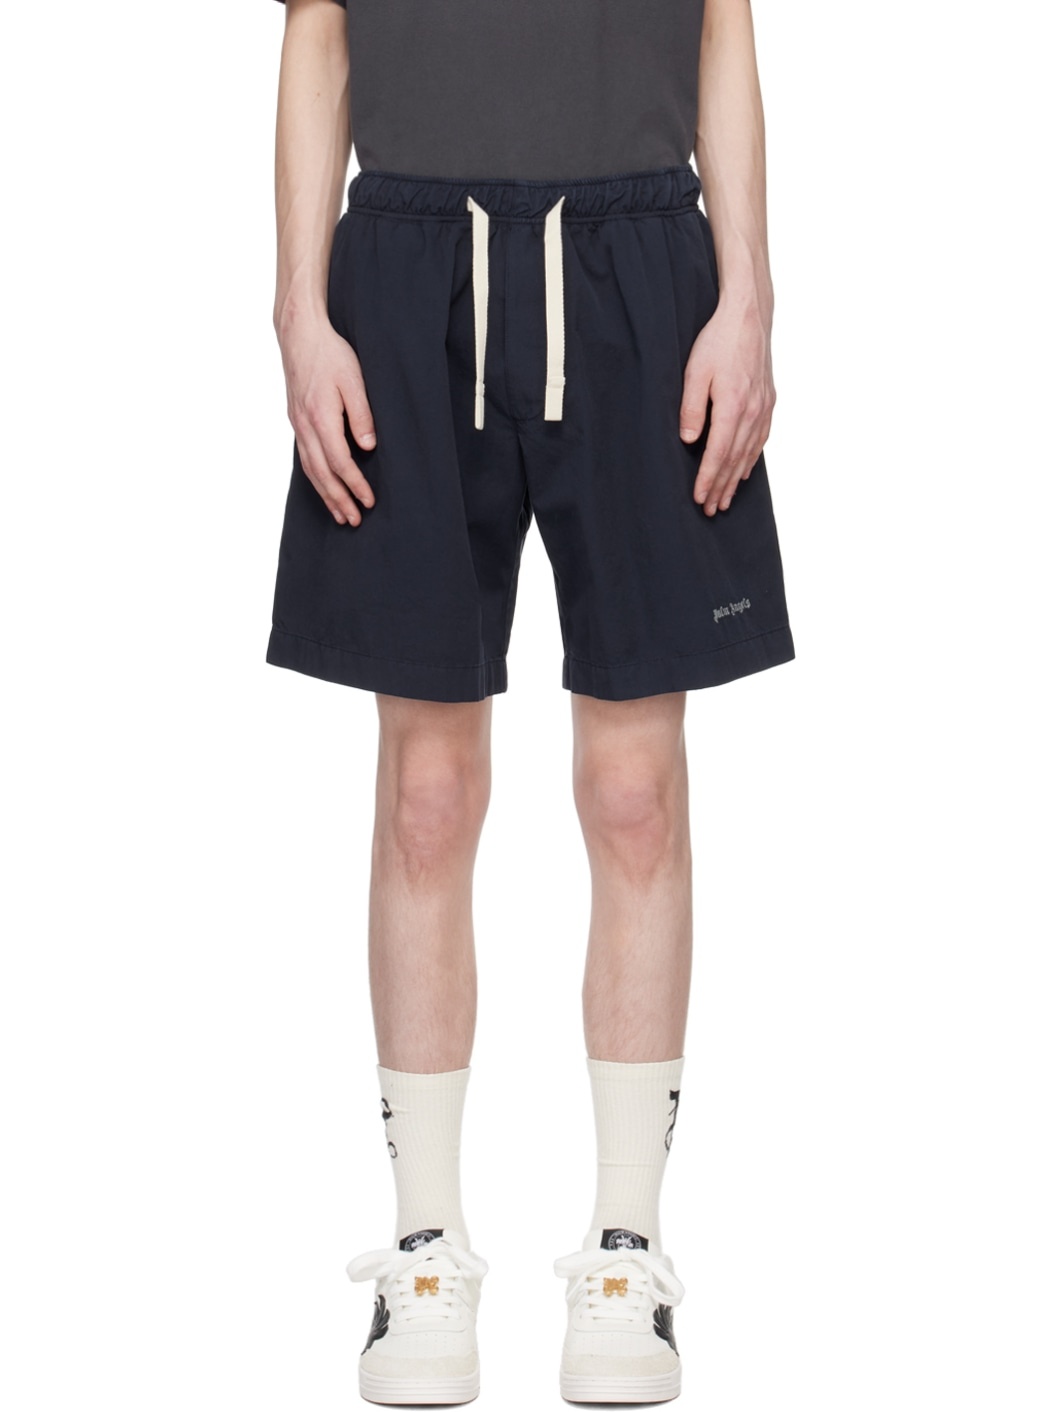 Navy Embroidered Shorts - 1